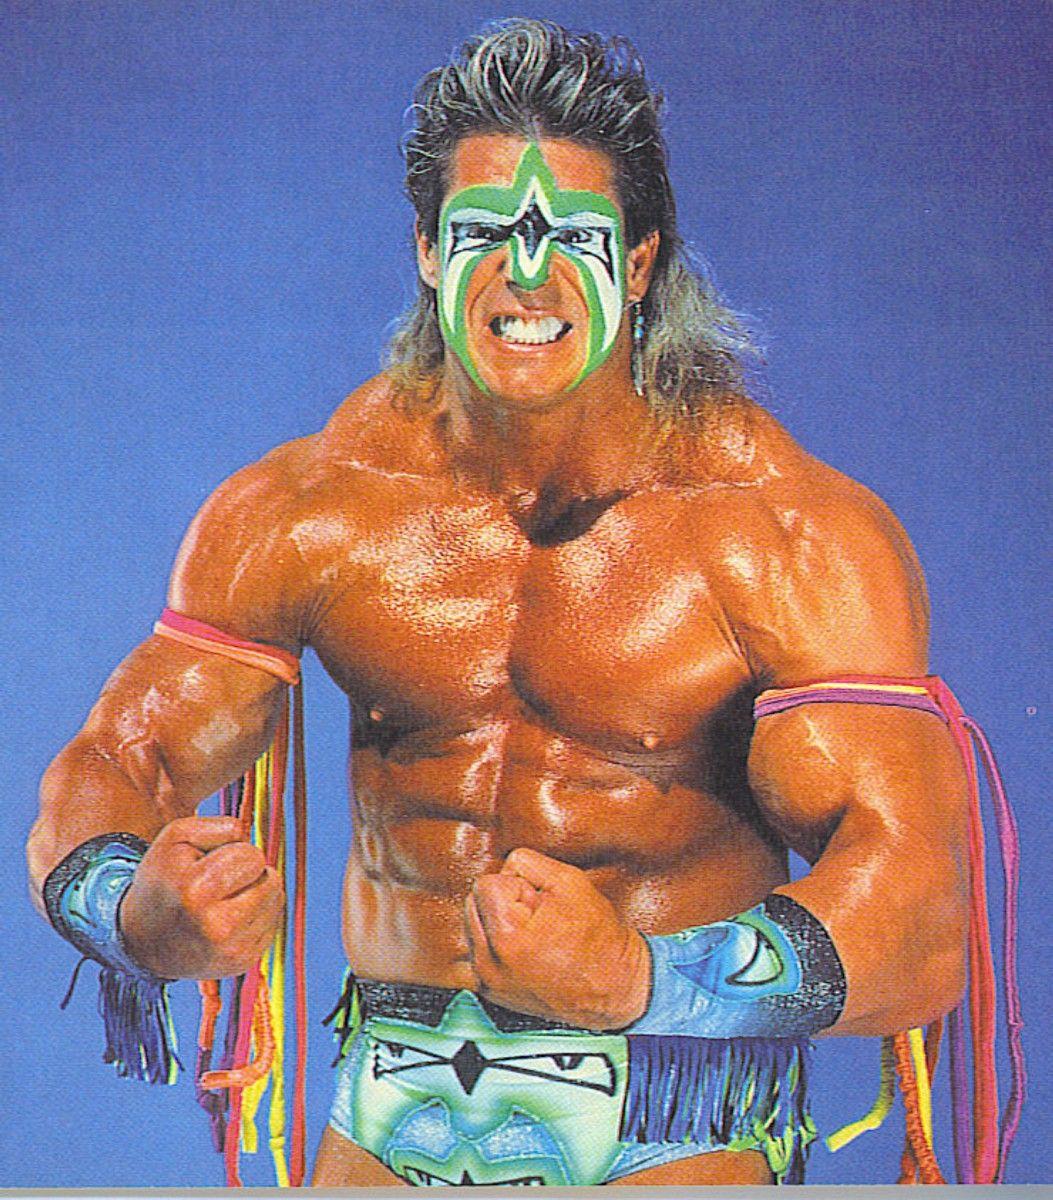 WWE Legend The Ultimate Warrior Wallpapers.